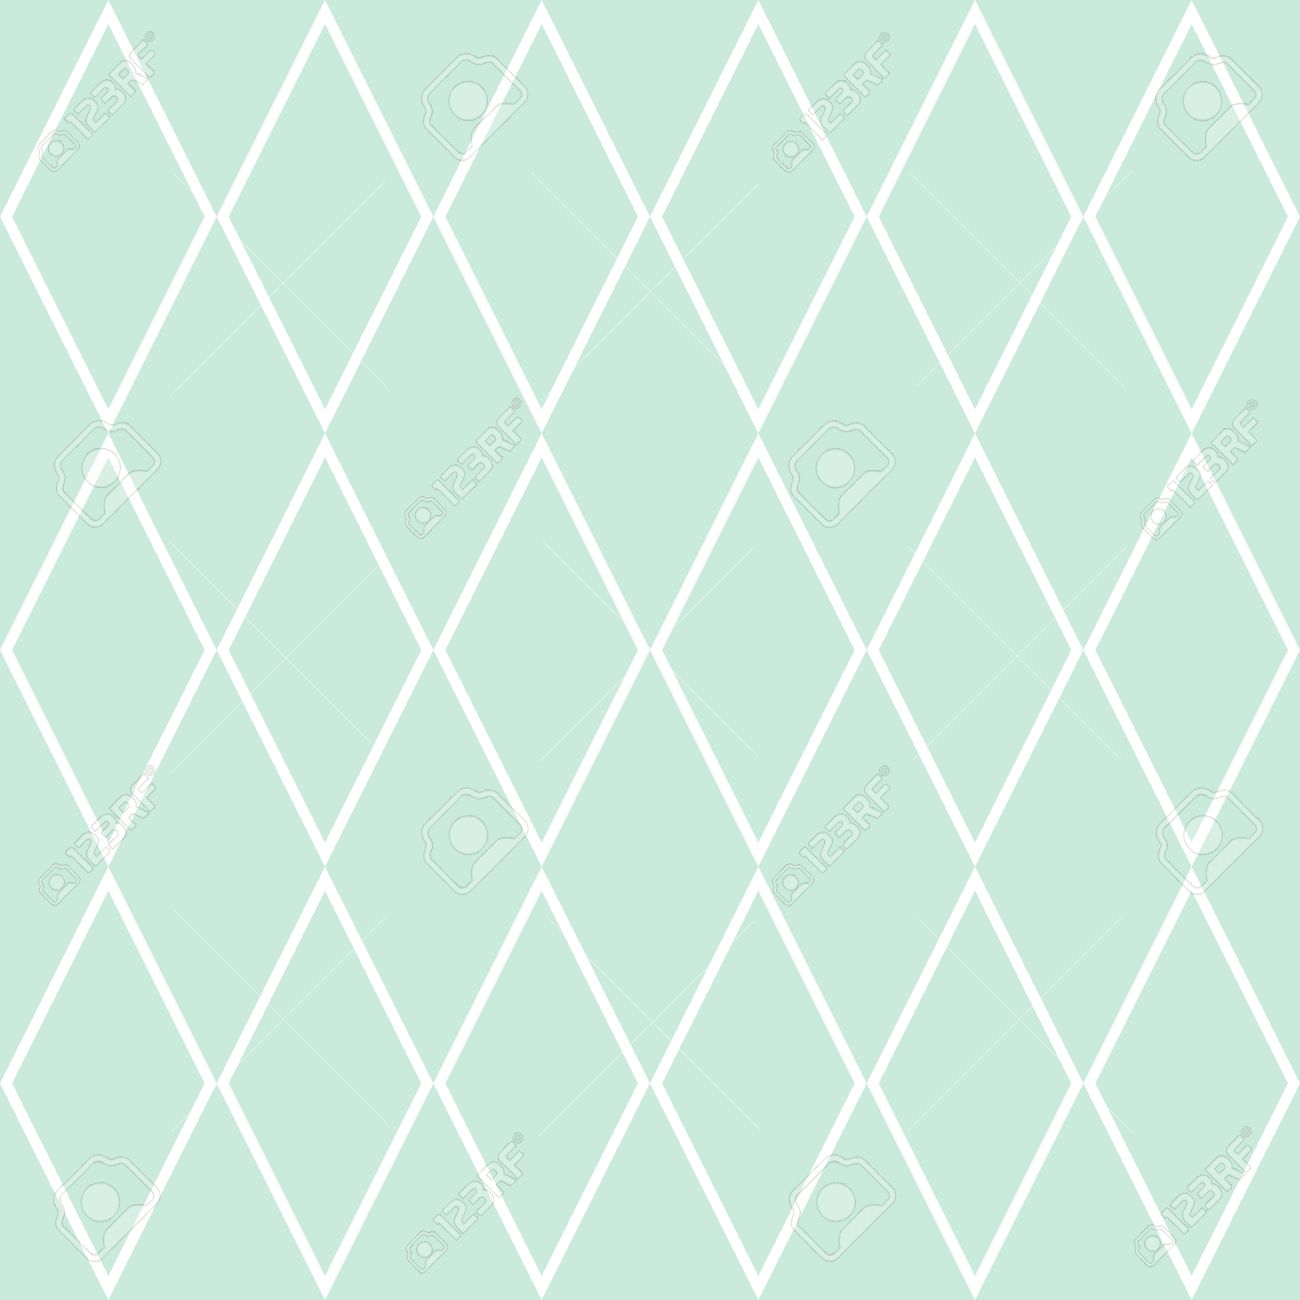 Tile Pattern Or Mint Green And White Wallpaper Background Royalty